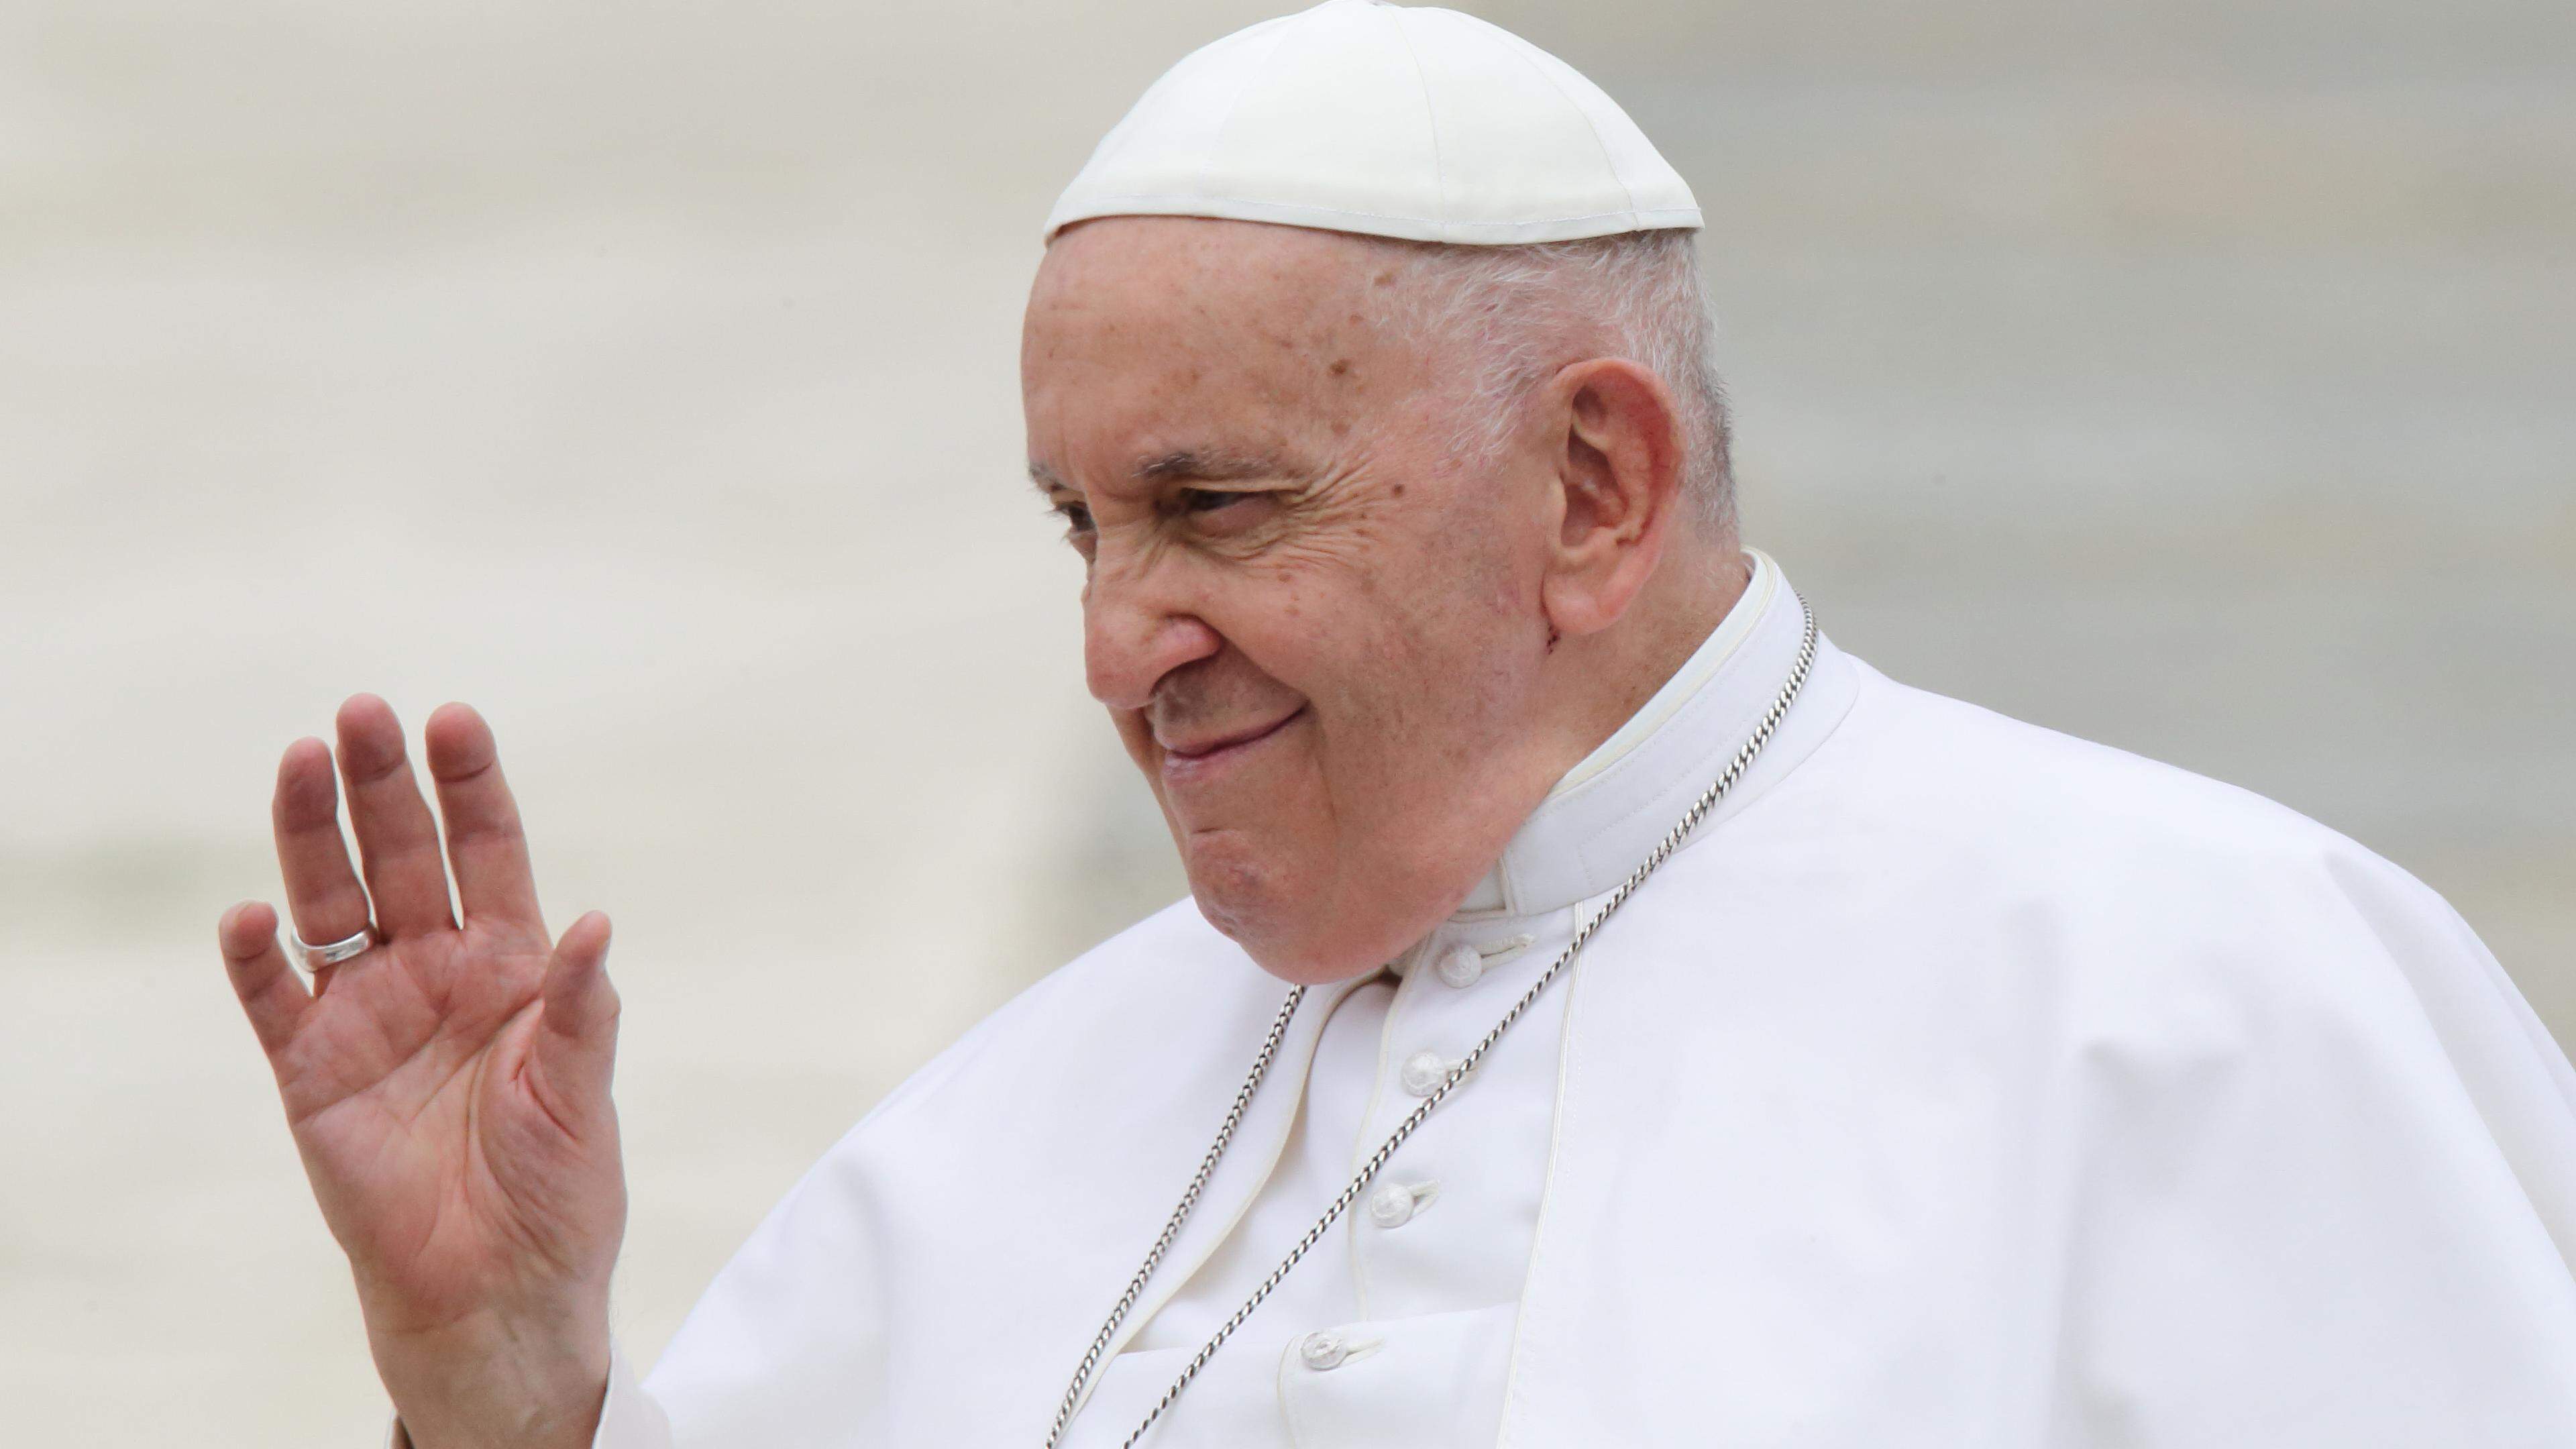 Pope Francis will be in Belgium in September and may well extend his visit to include a few hours in the Grand Duchy